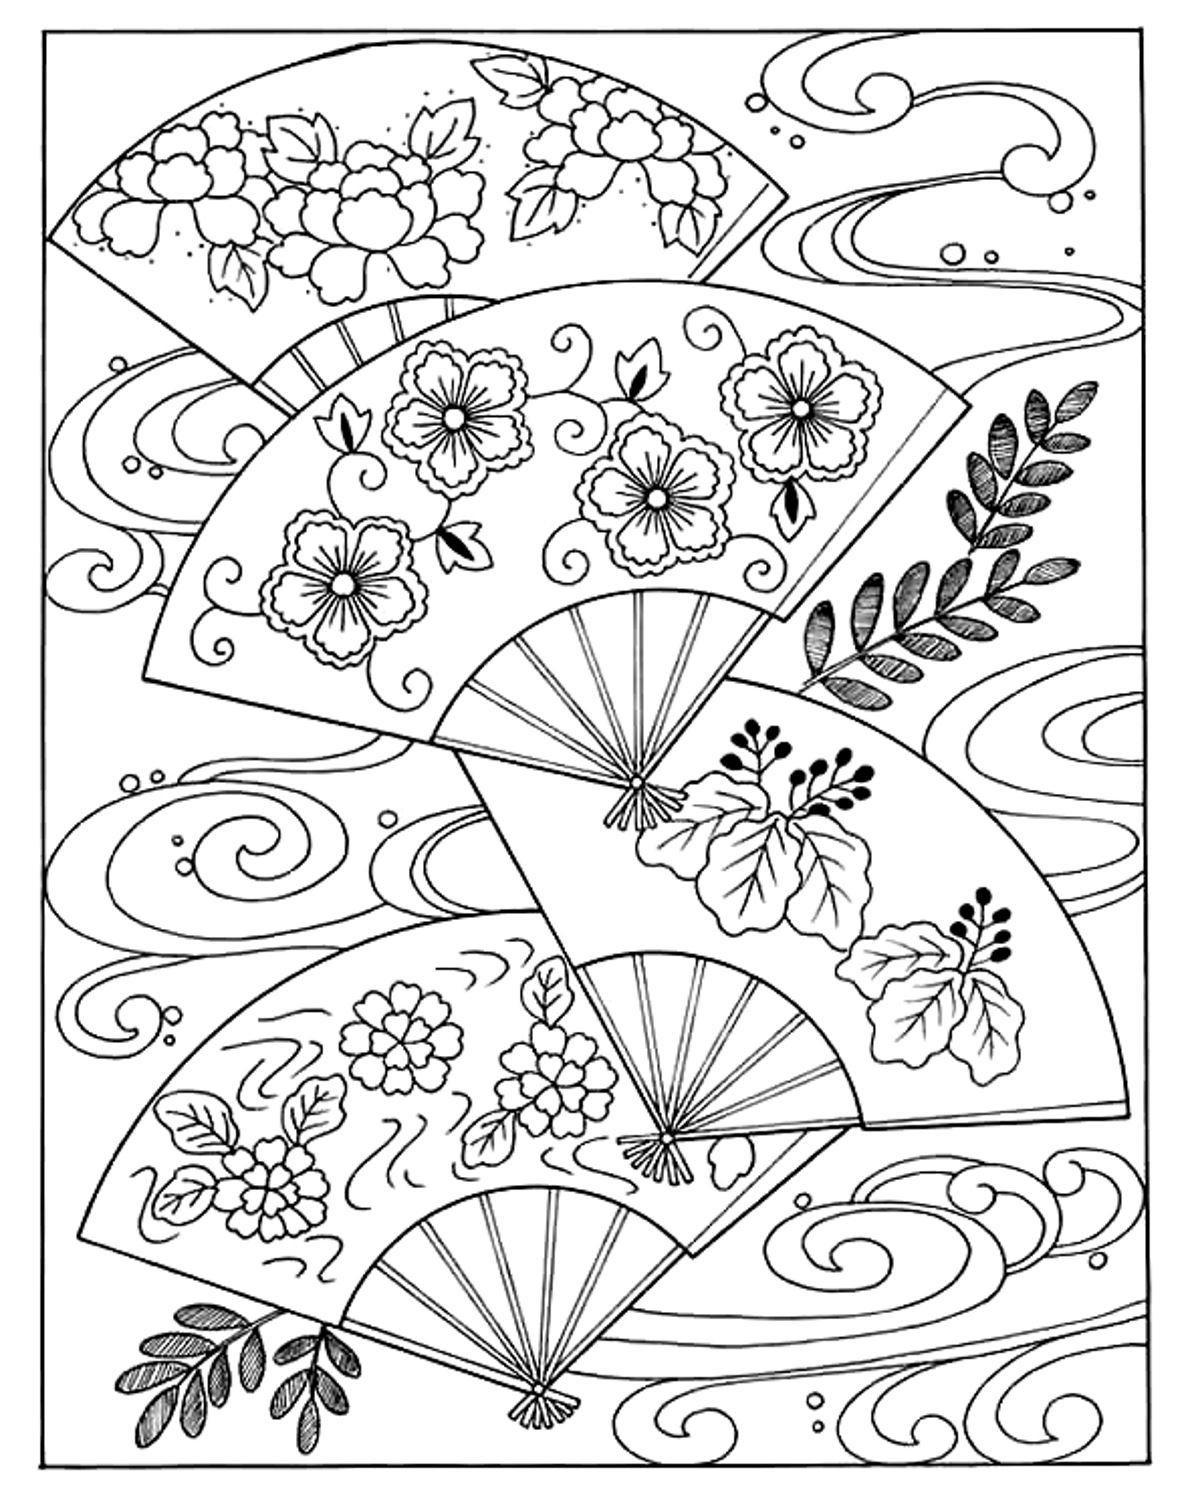 Japan - | Coloring Pages For Adults : coloring-japanese-hand-fan